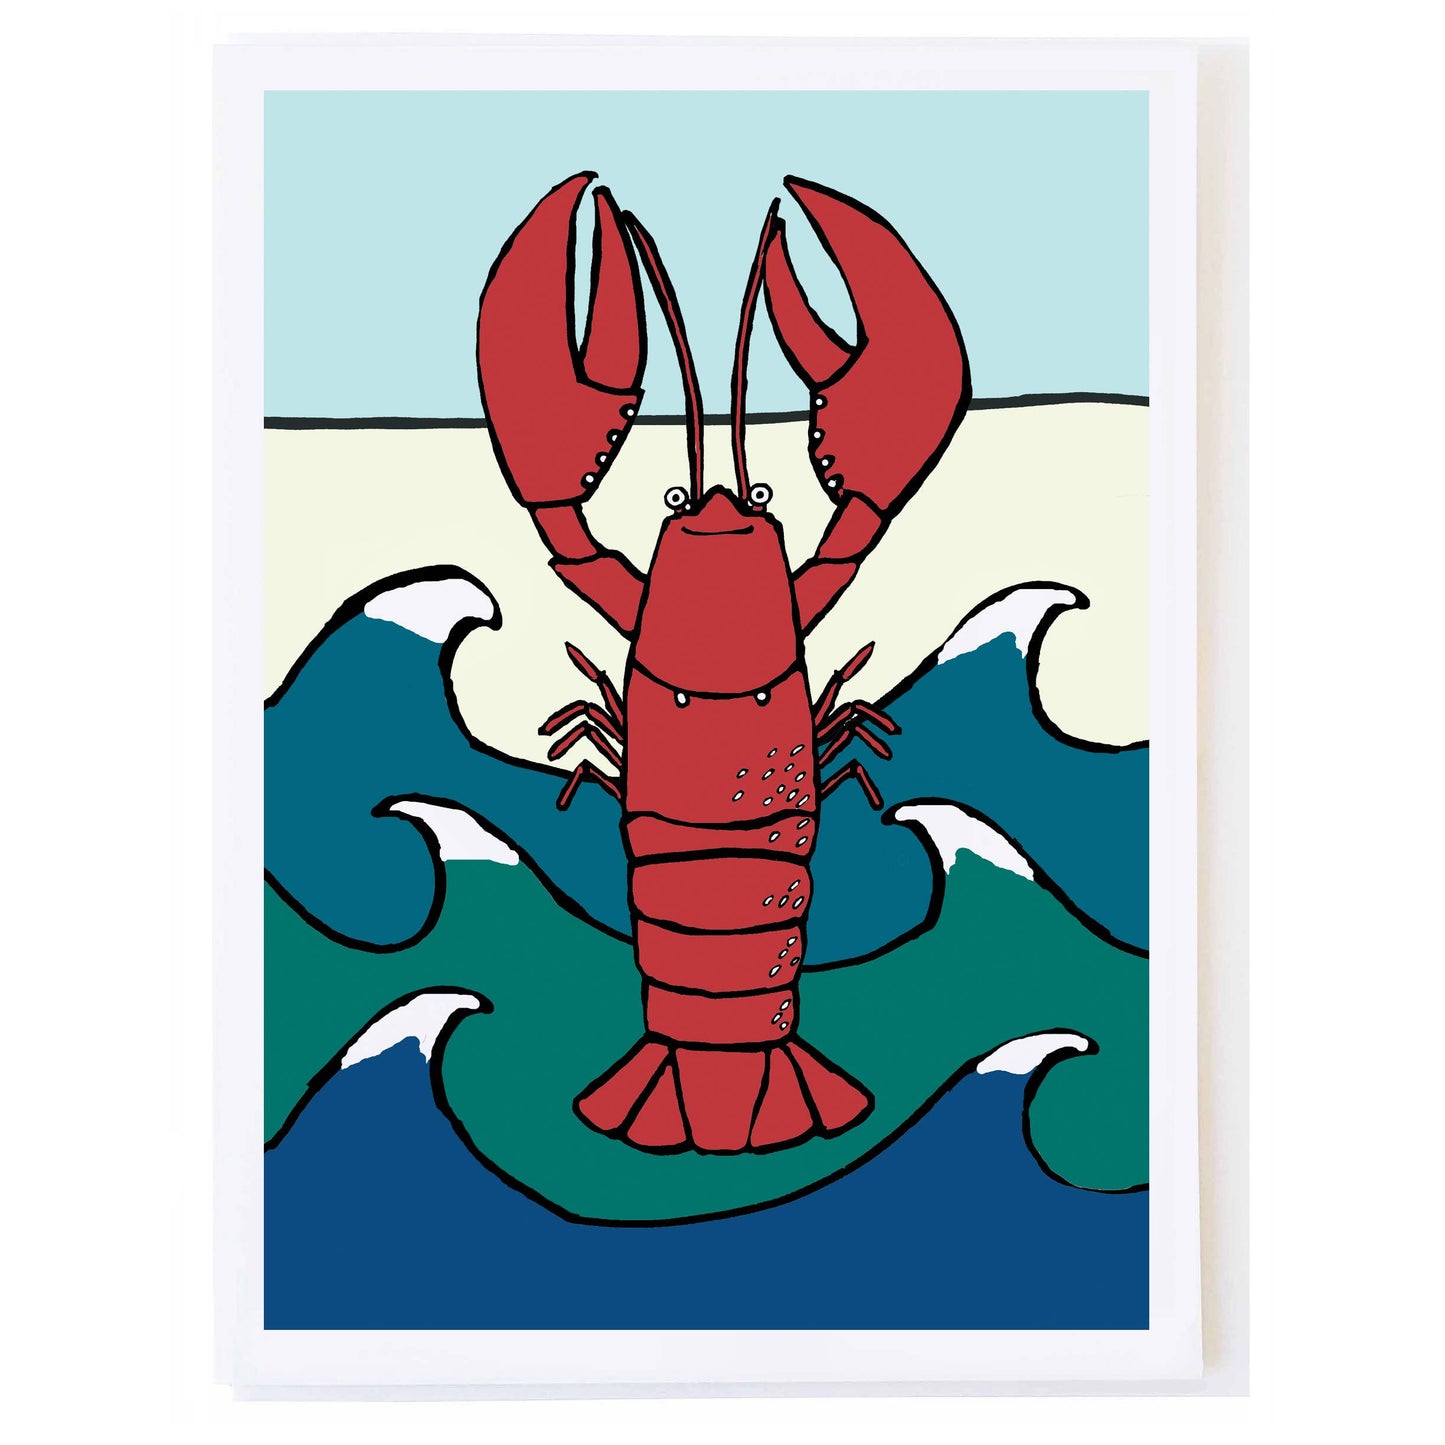 Lobster in Waves - Greeting Card (Blank Inside) by Molly O